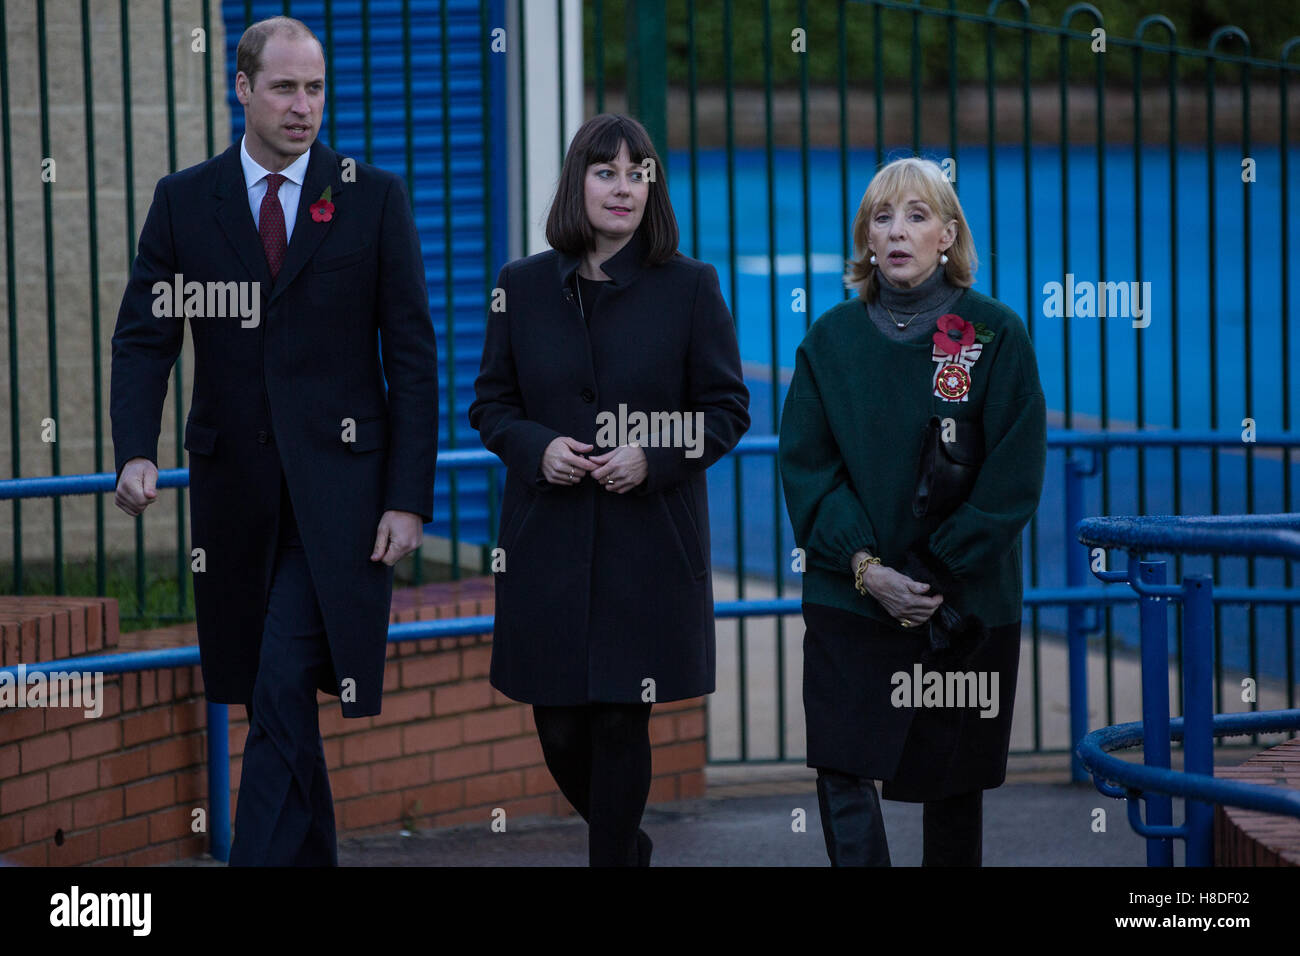 London, UK. 10th November, 2016. The Duke of Cambridge visits Kensington Memorial Park as President of Fields in Trust to officially mark the dedication of the park by the Royal Borough of Kensington and Chelsea to the Centenary Fields programme. Centenary Fields honours the memory of the millions who lost their lives during the First World War by securing and protecting outdoor recreational space in perpetuity for the benefit of future generations. Credit:  Mark Kerrison/Alamy Live News Stock Photo